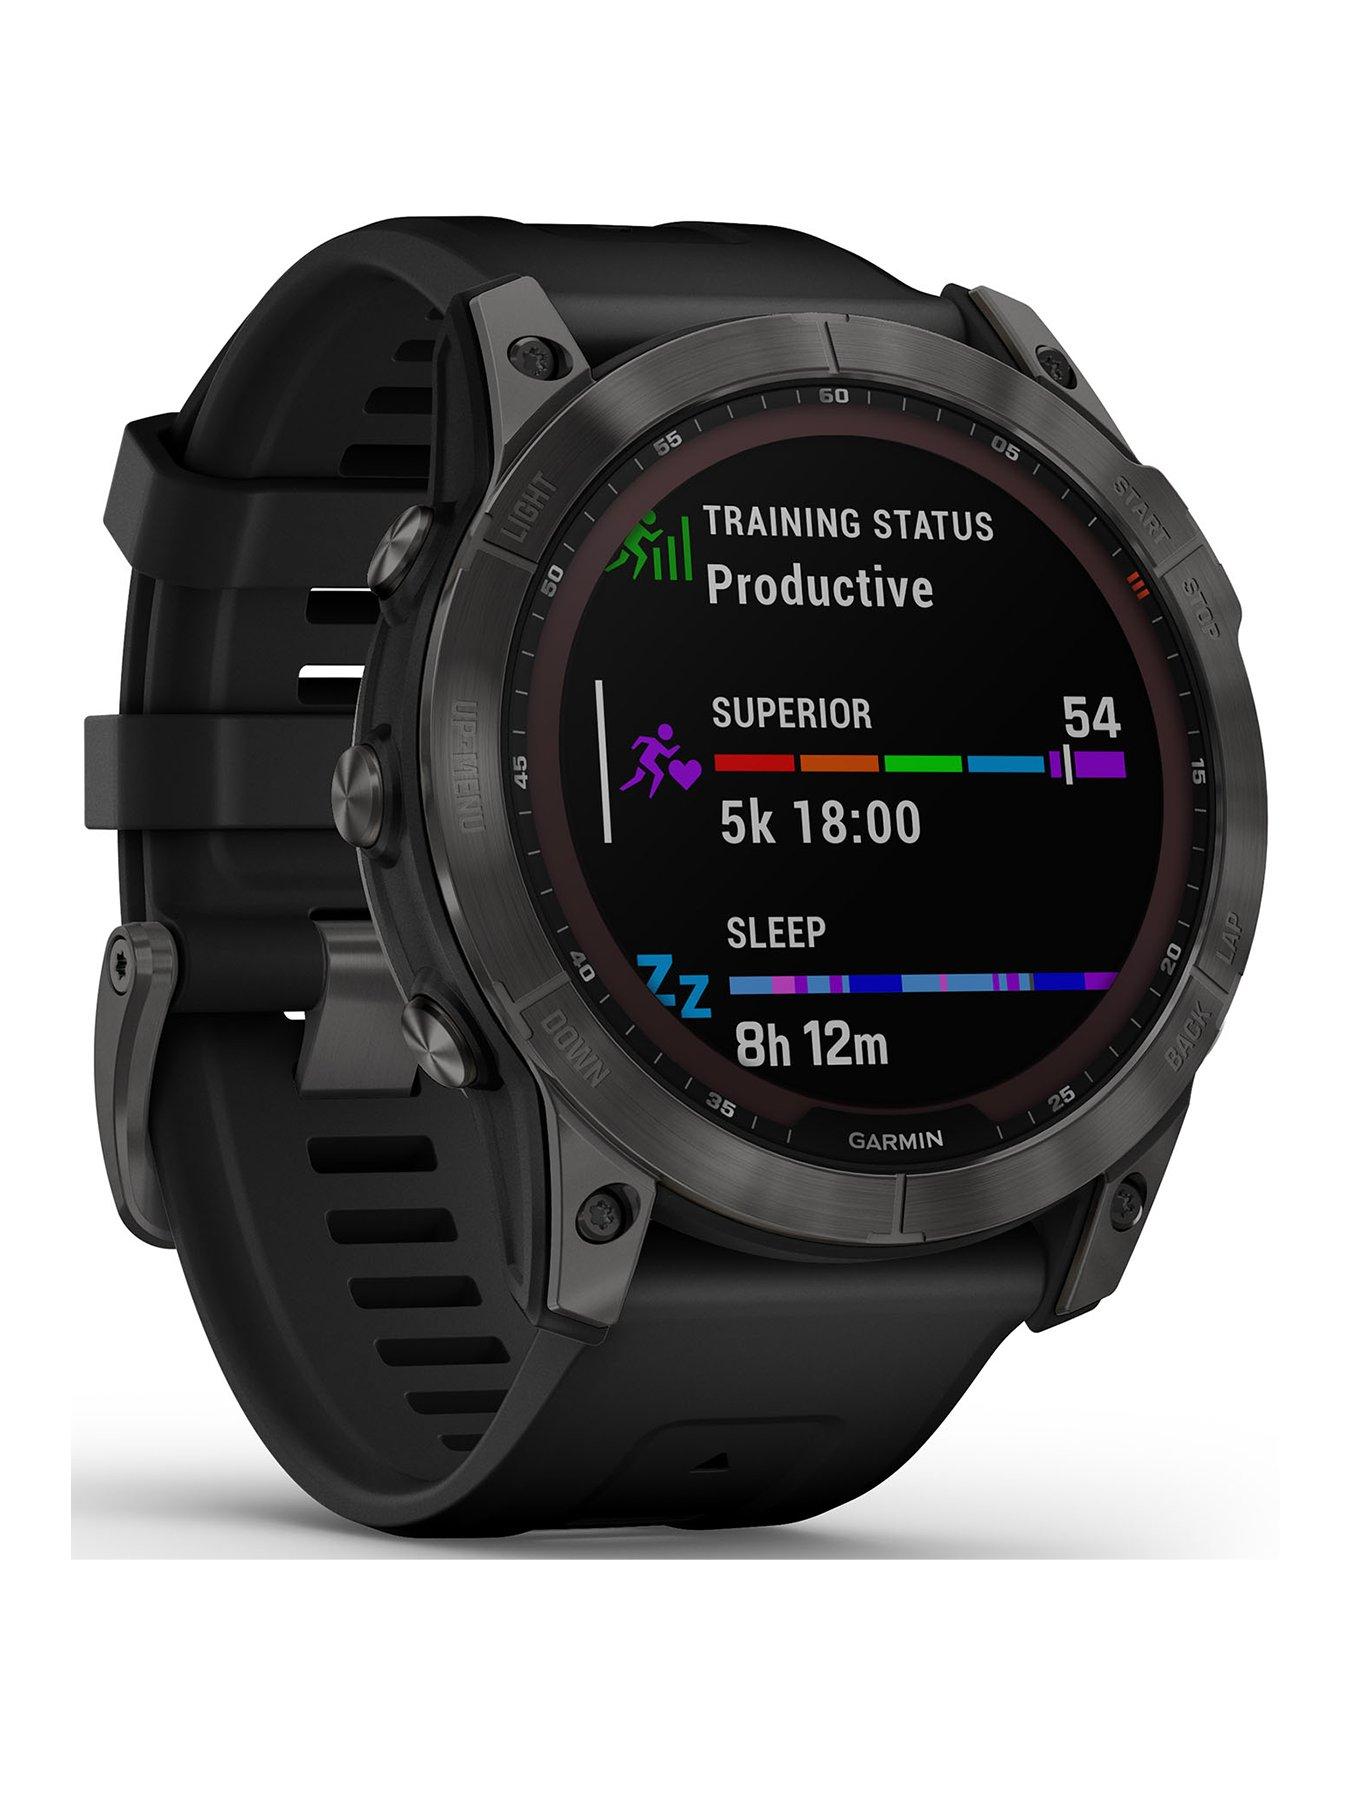 Garmin epix Gen 2 Sapphire Edition Premium Active GPS Touchscreen  Smartwatch, White Titanium  Heart Rate Monitor, Up to 16 Day Battery Life,  Built-in Workouts with Signature Series Charging Bundle : Electronics 